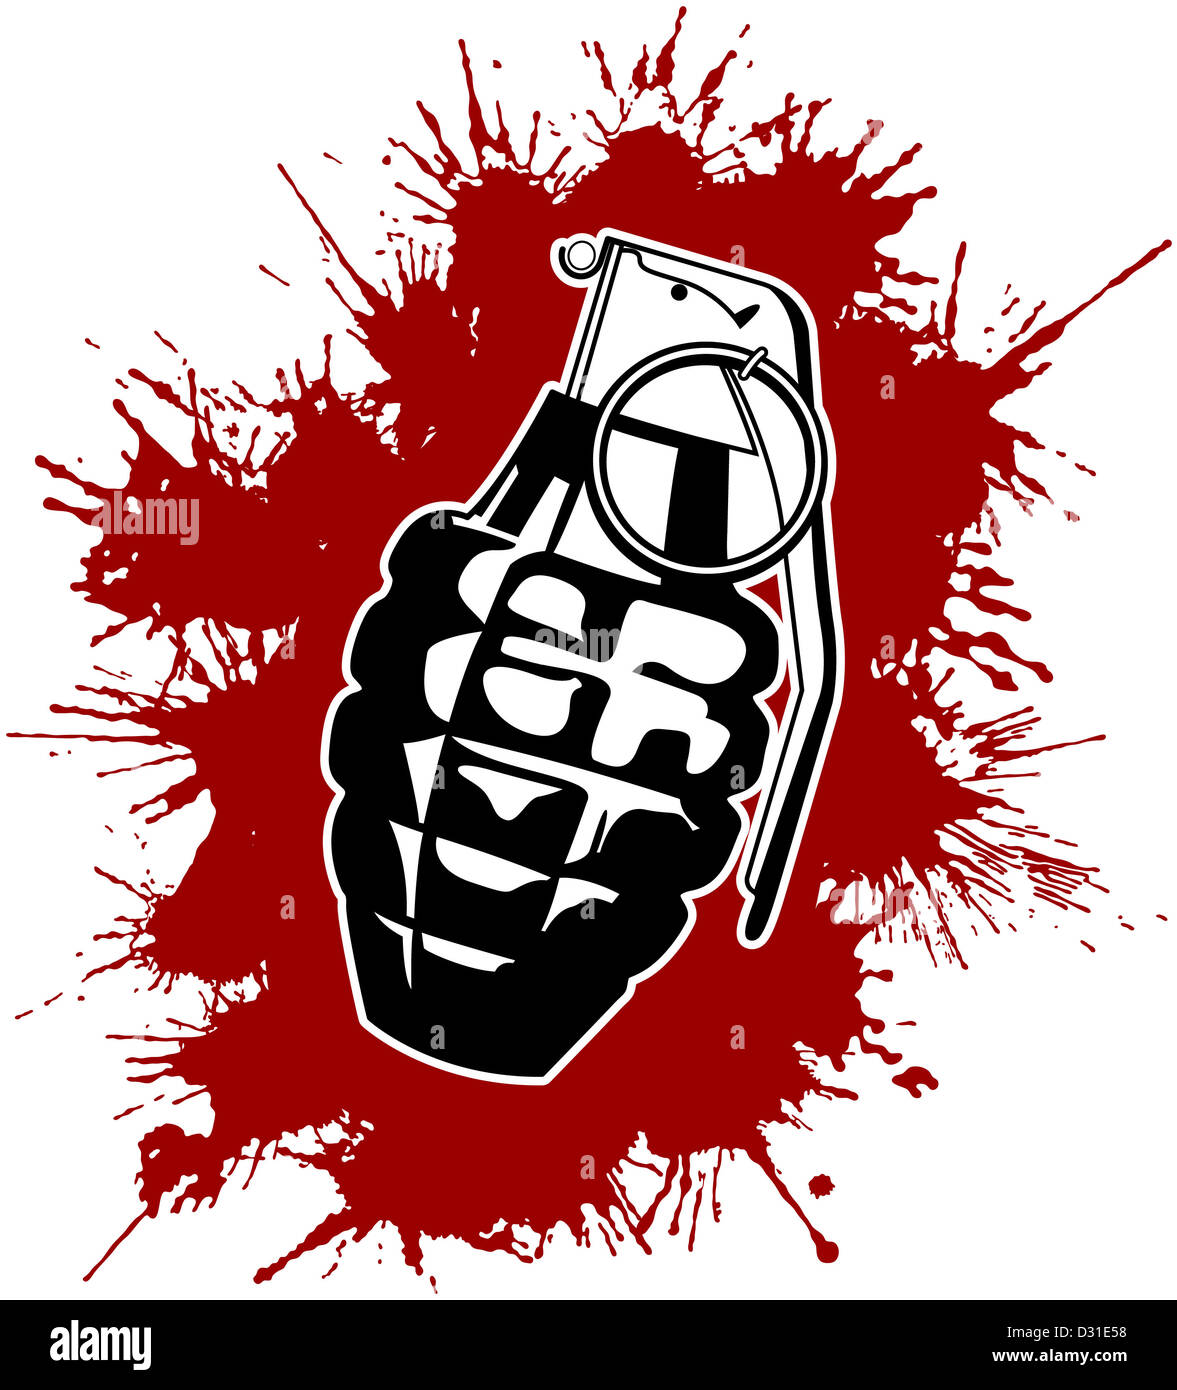 Grenade with splattered blood Stock Photo